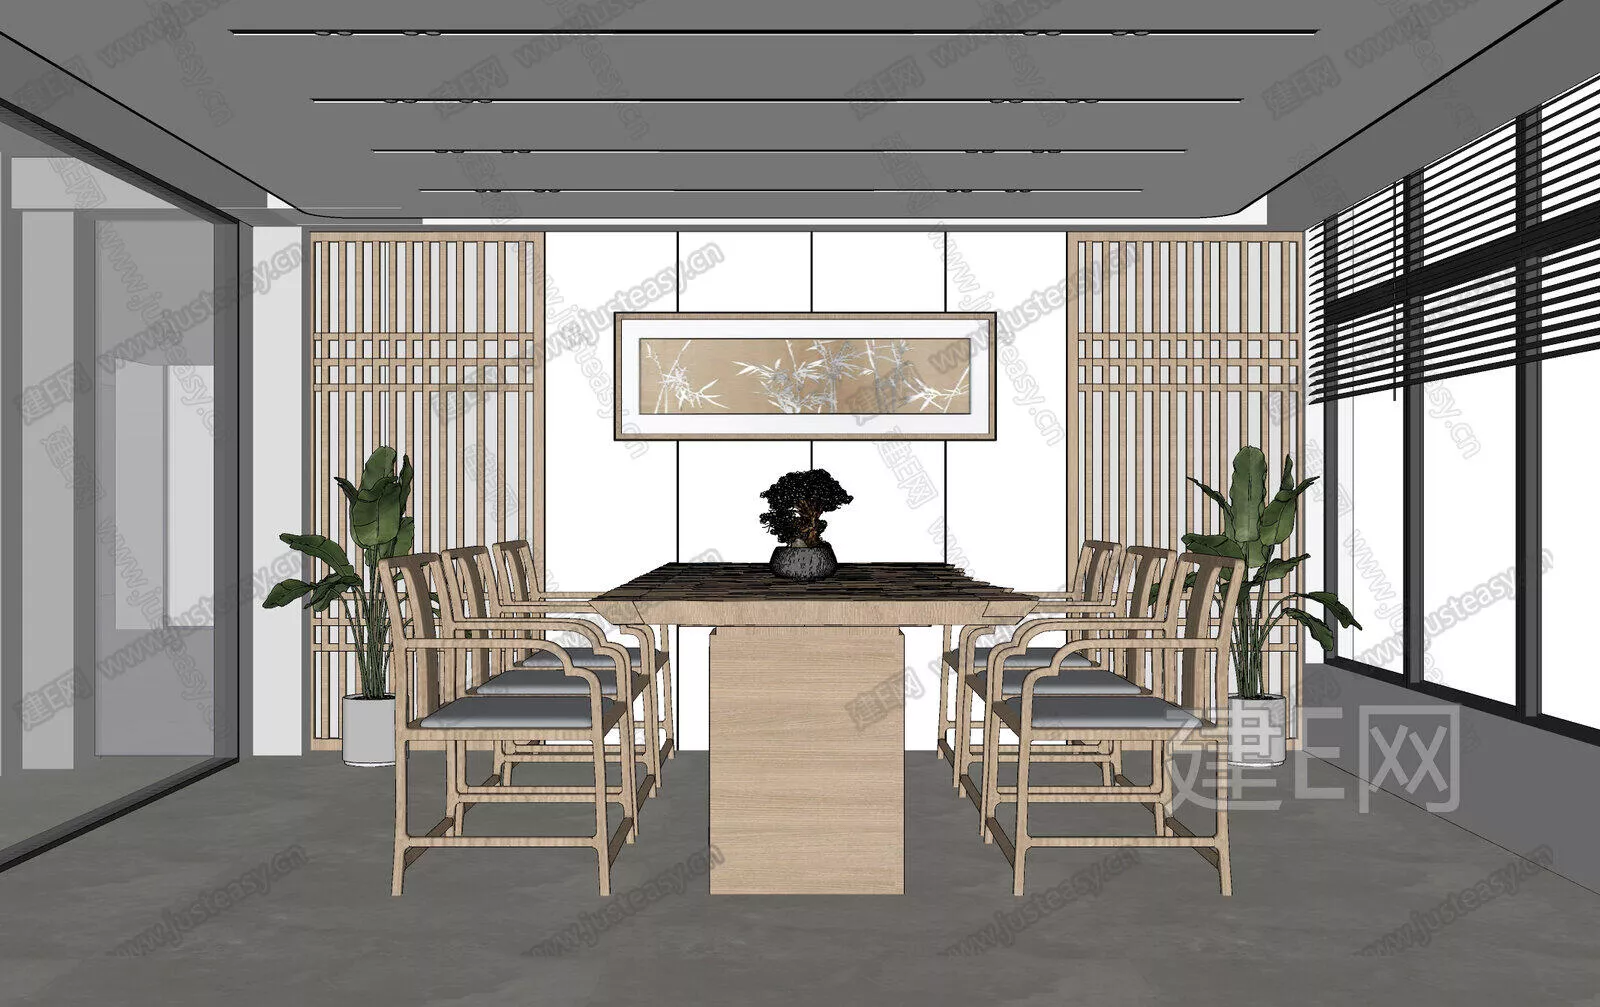 CHINESE MEETING ROOM - SKETCHUP 3D SCENE - ENSCAPE - 112673878